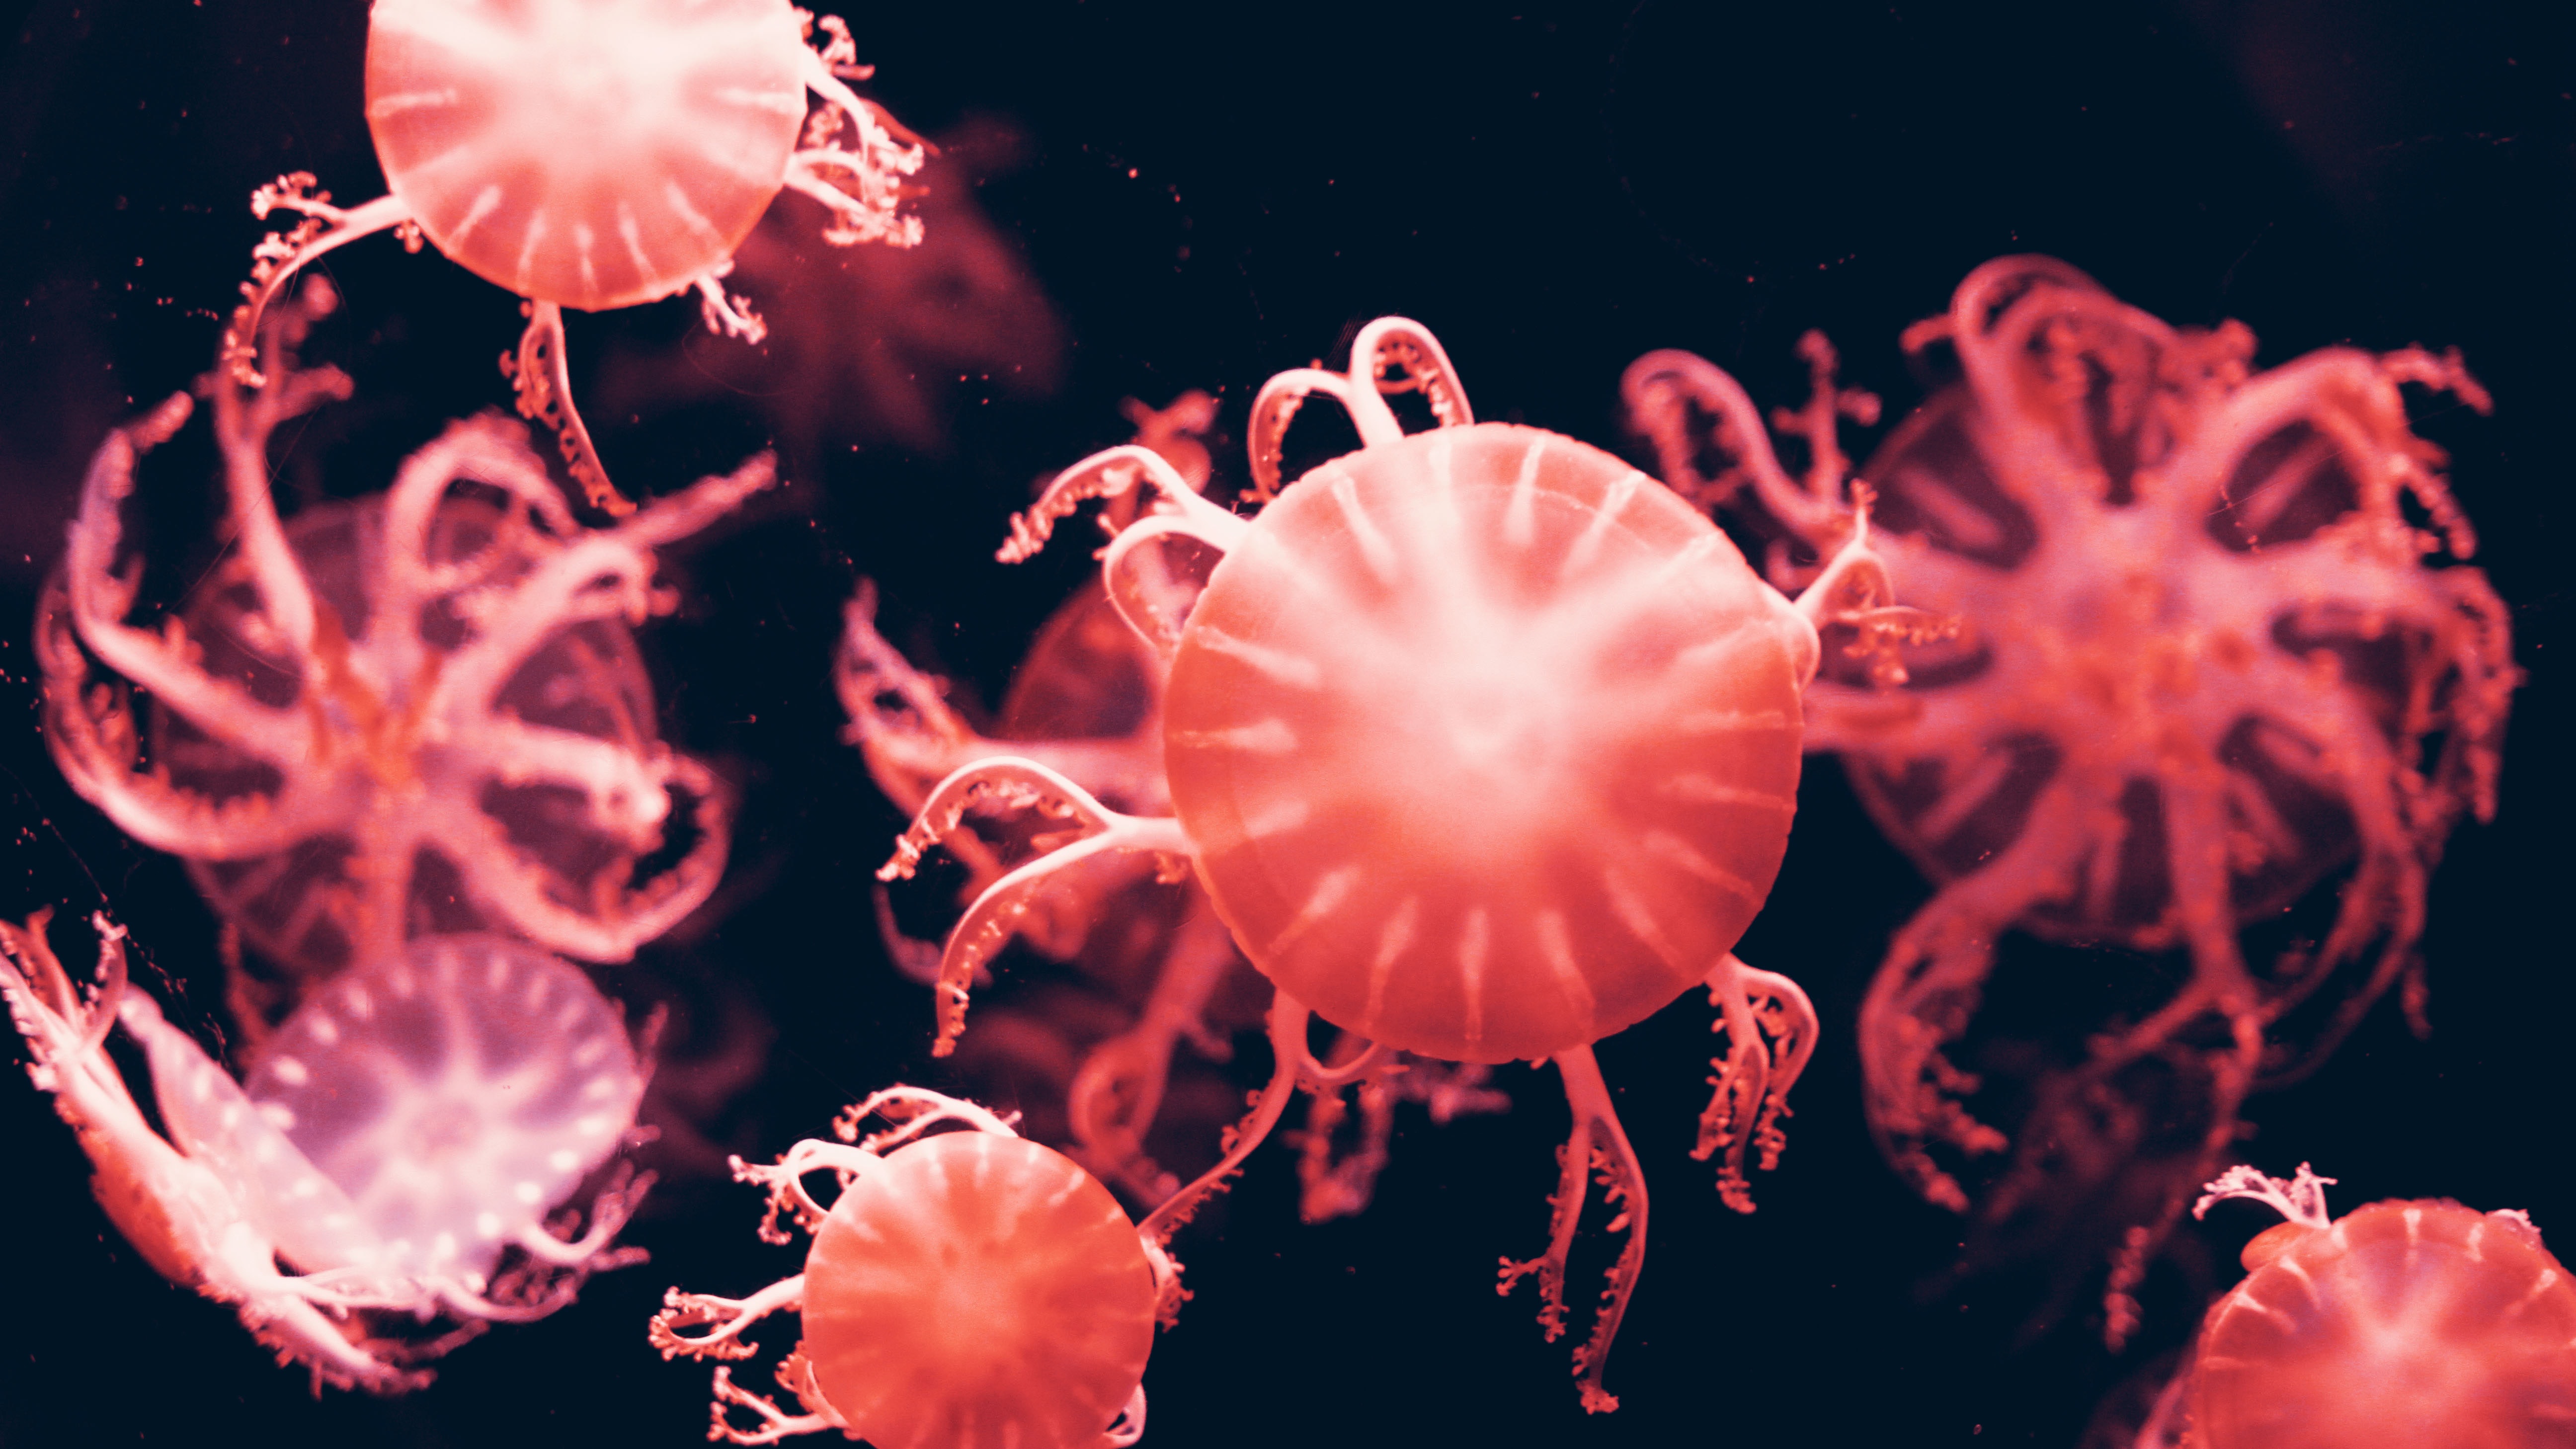 Red jelly fish photo